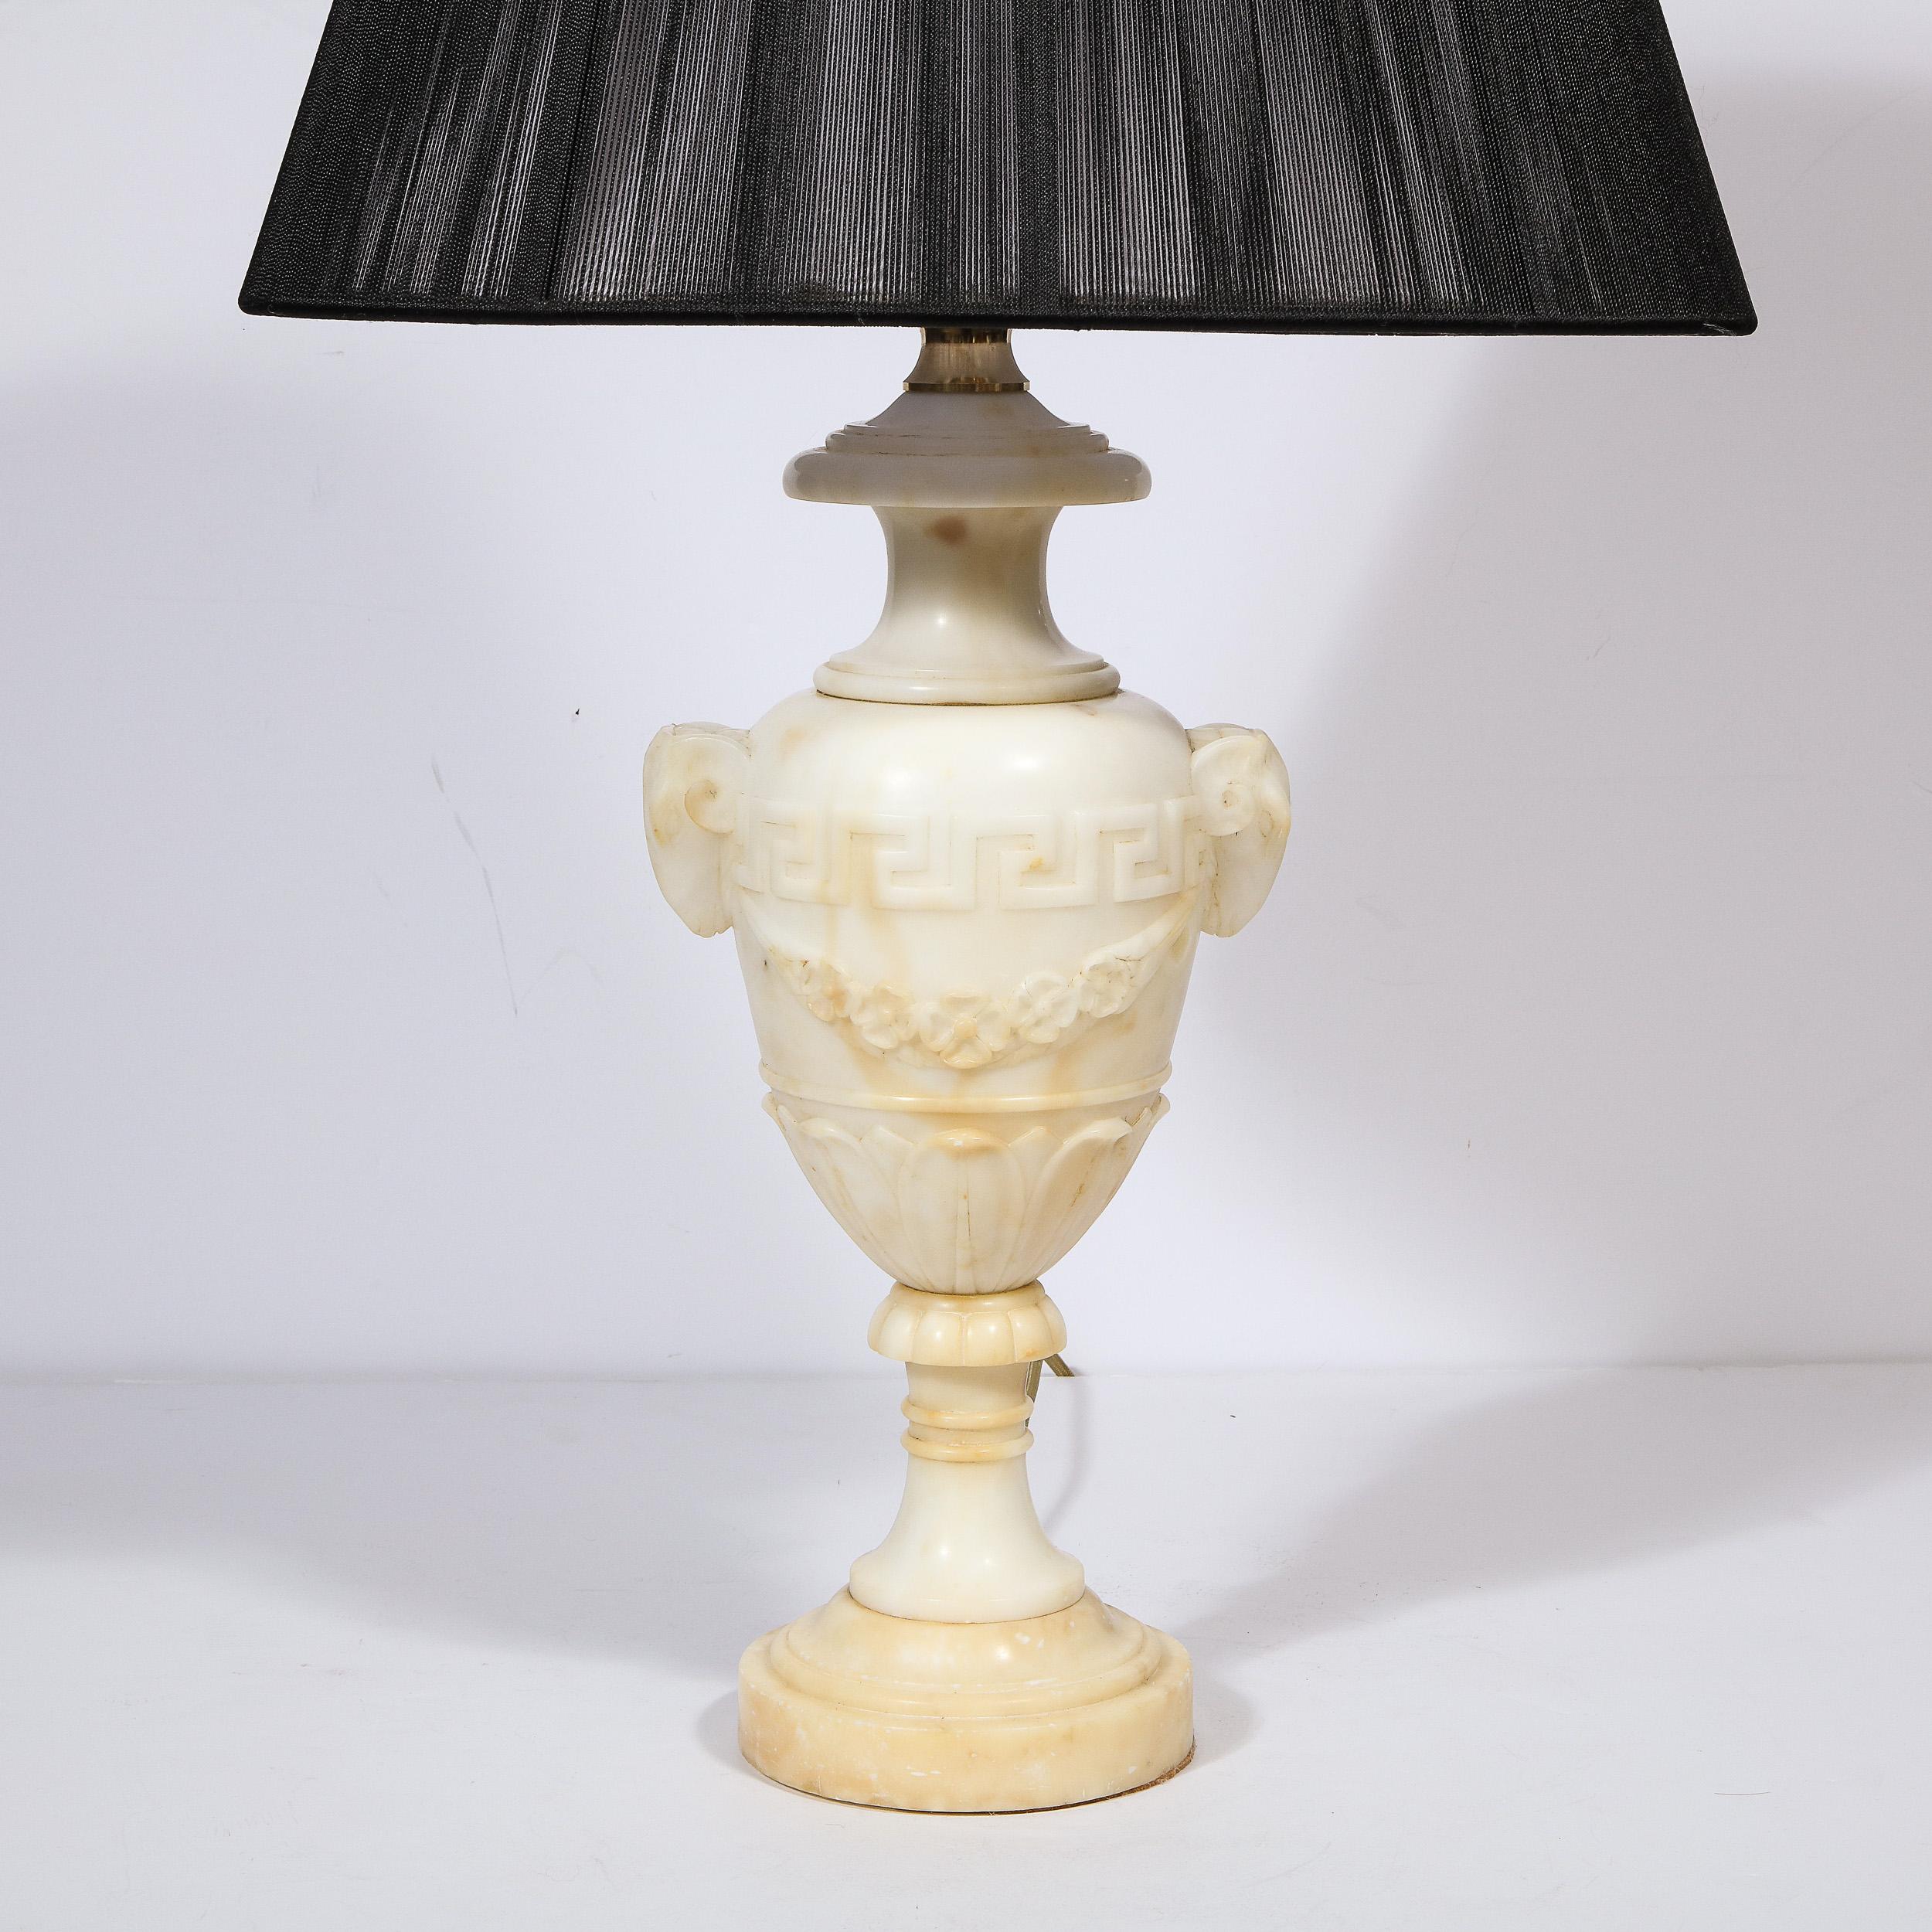 This elegant pair of Hollywood Regency alabaster table lamps were realized in France circa 1940.  Realized in a sumptuous variegated cream hued alabaster, these lamps have been hand carved with a wealth neoclassical details gleaned from ancient